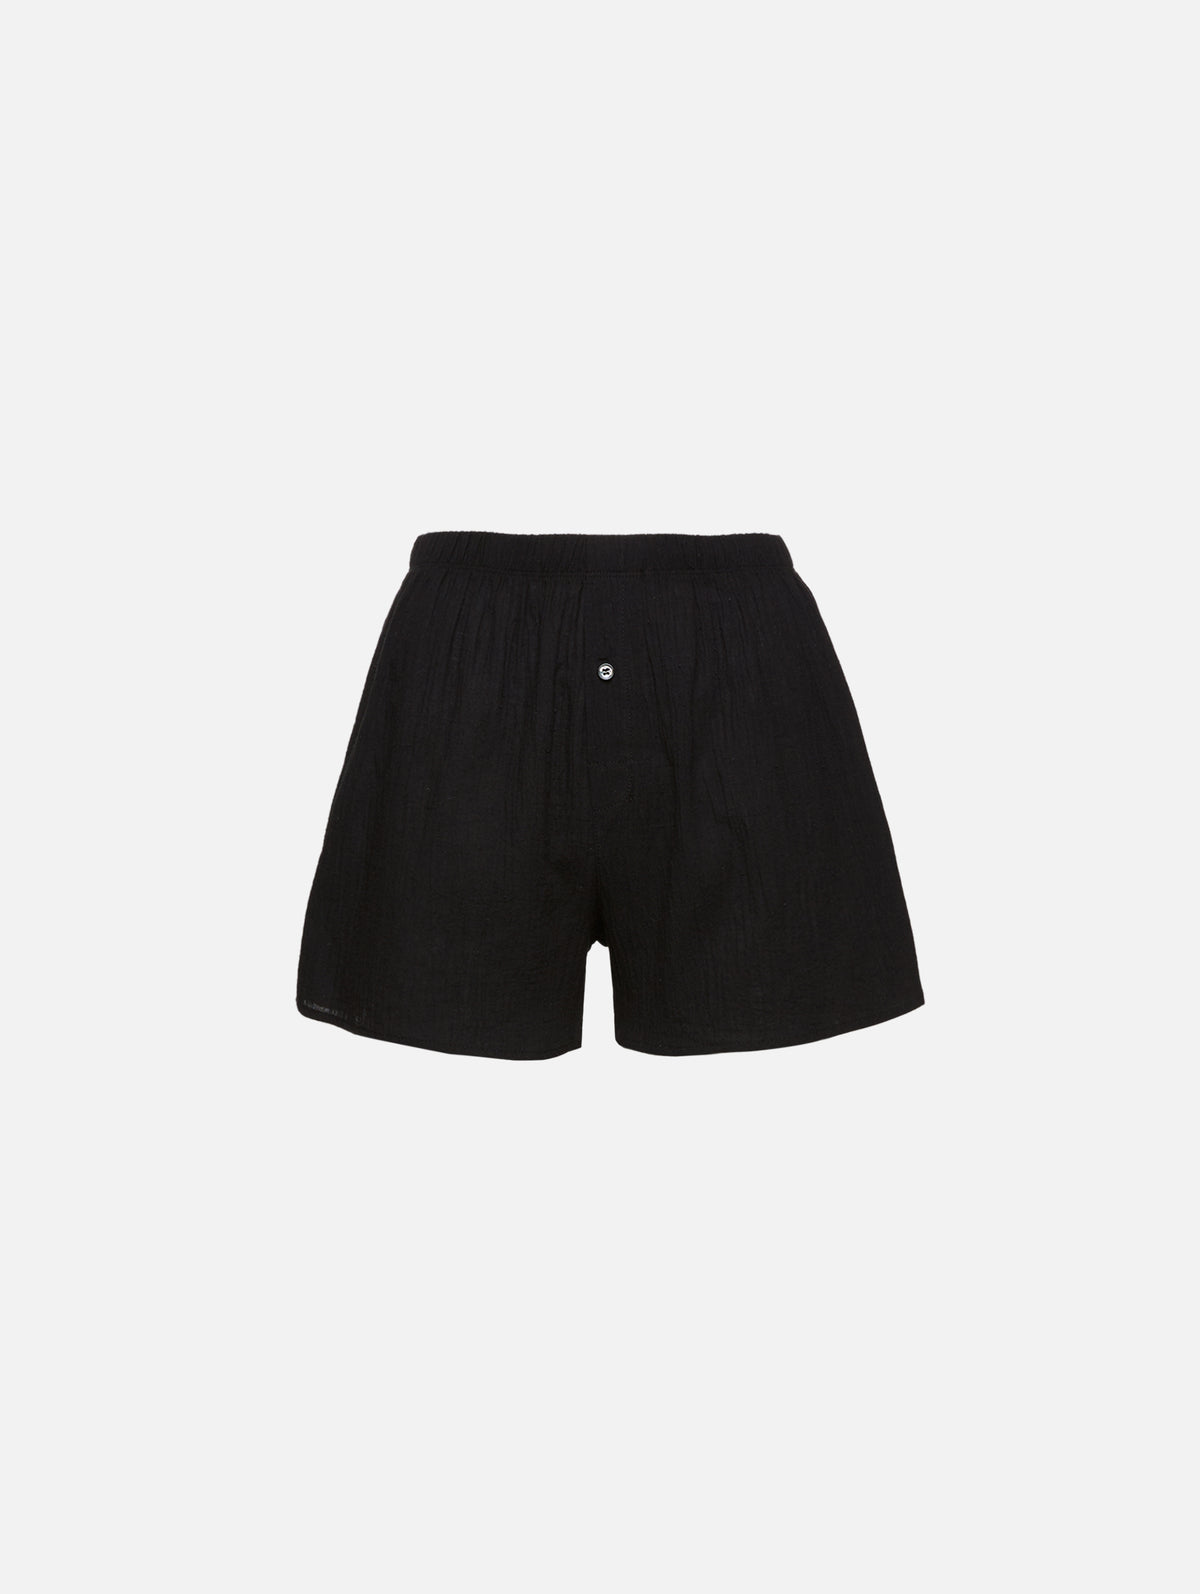 view 1 - Dylan Boxer Short